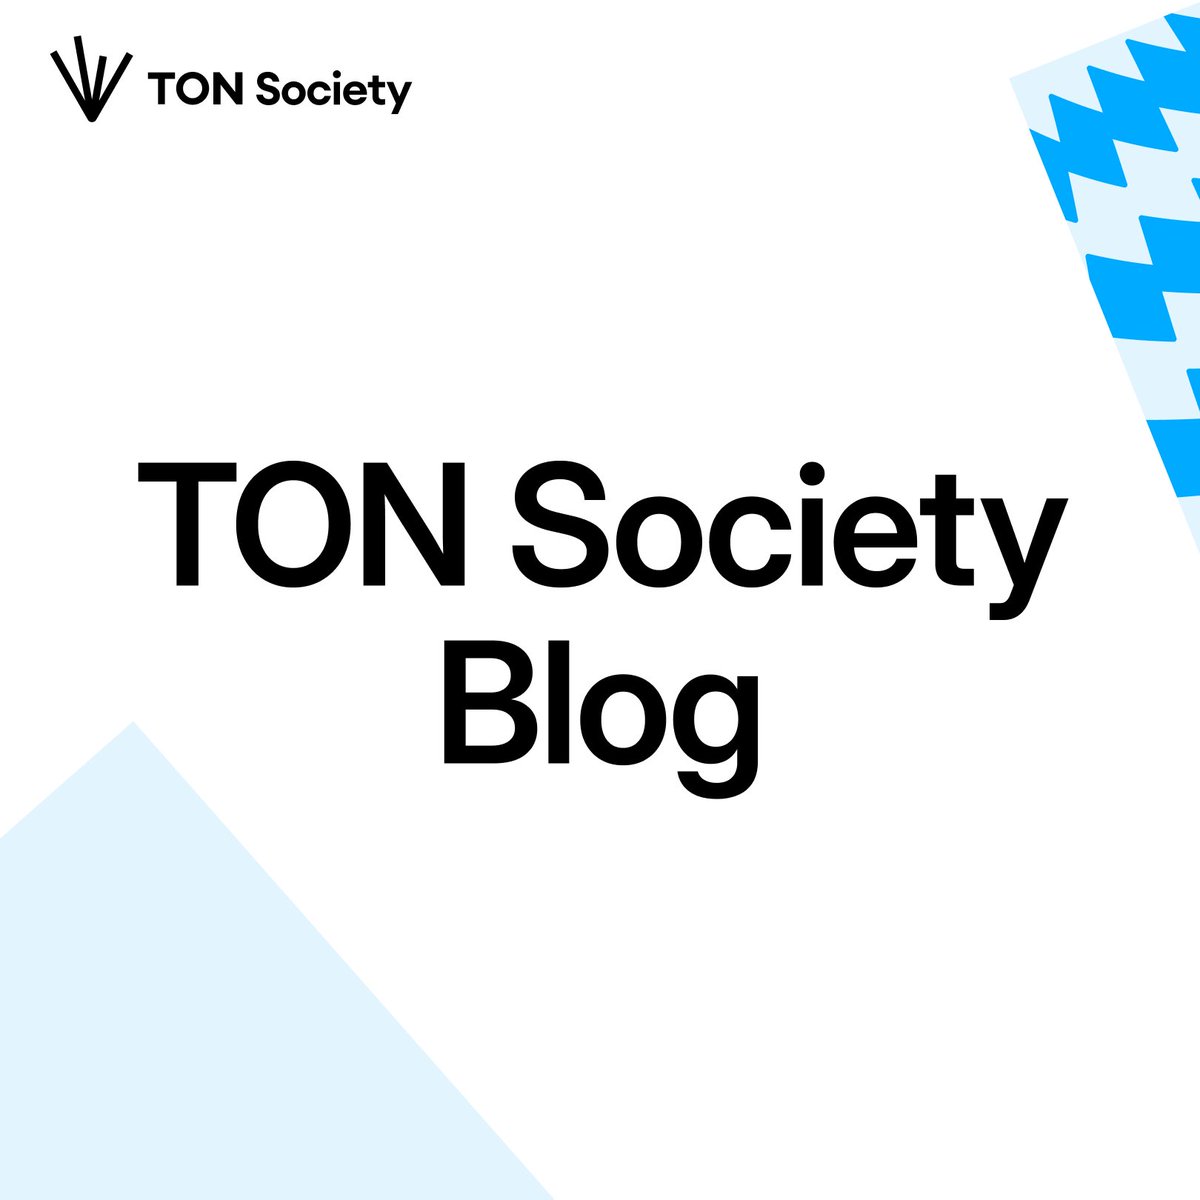 TON Society Blog is live on Substack! Let’s celebrate! 💎Once our blog reaches 5K subscribers, 200 randomly selected users will share a 1K-Toncoin prize pool. Subscribe by entering your email: tonsociety.substack.com ✏️We also reward content creators who join our Publications